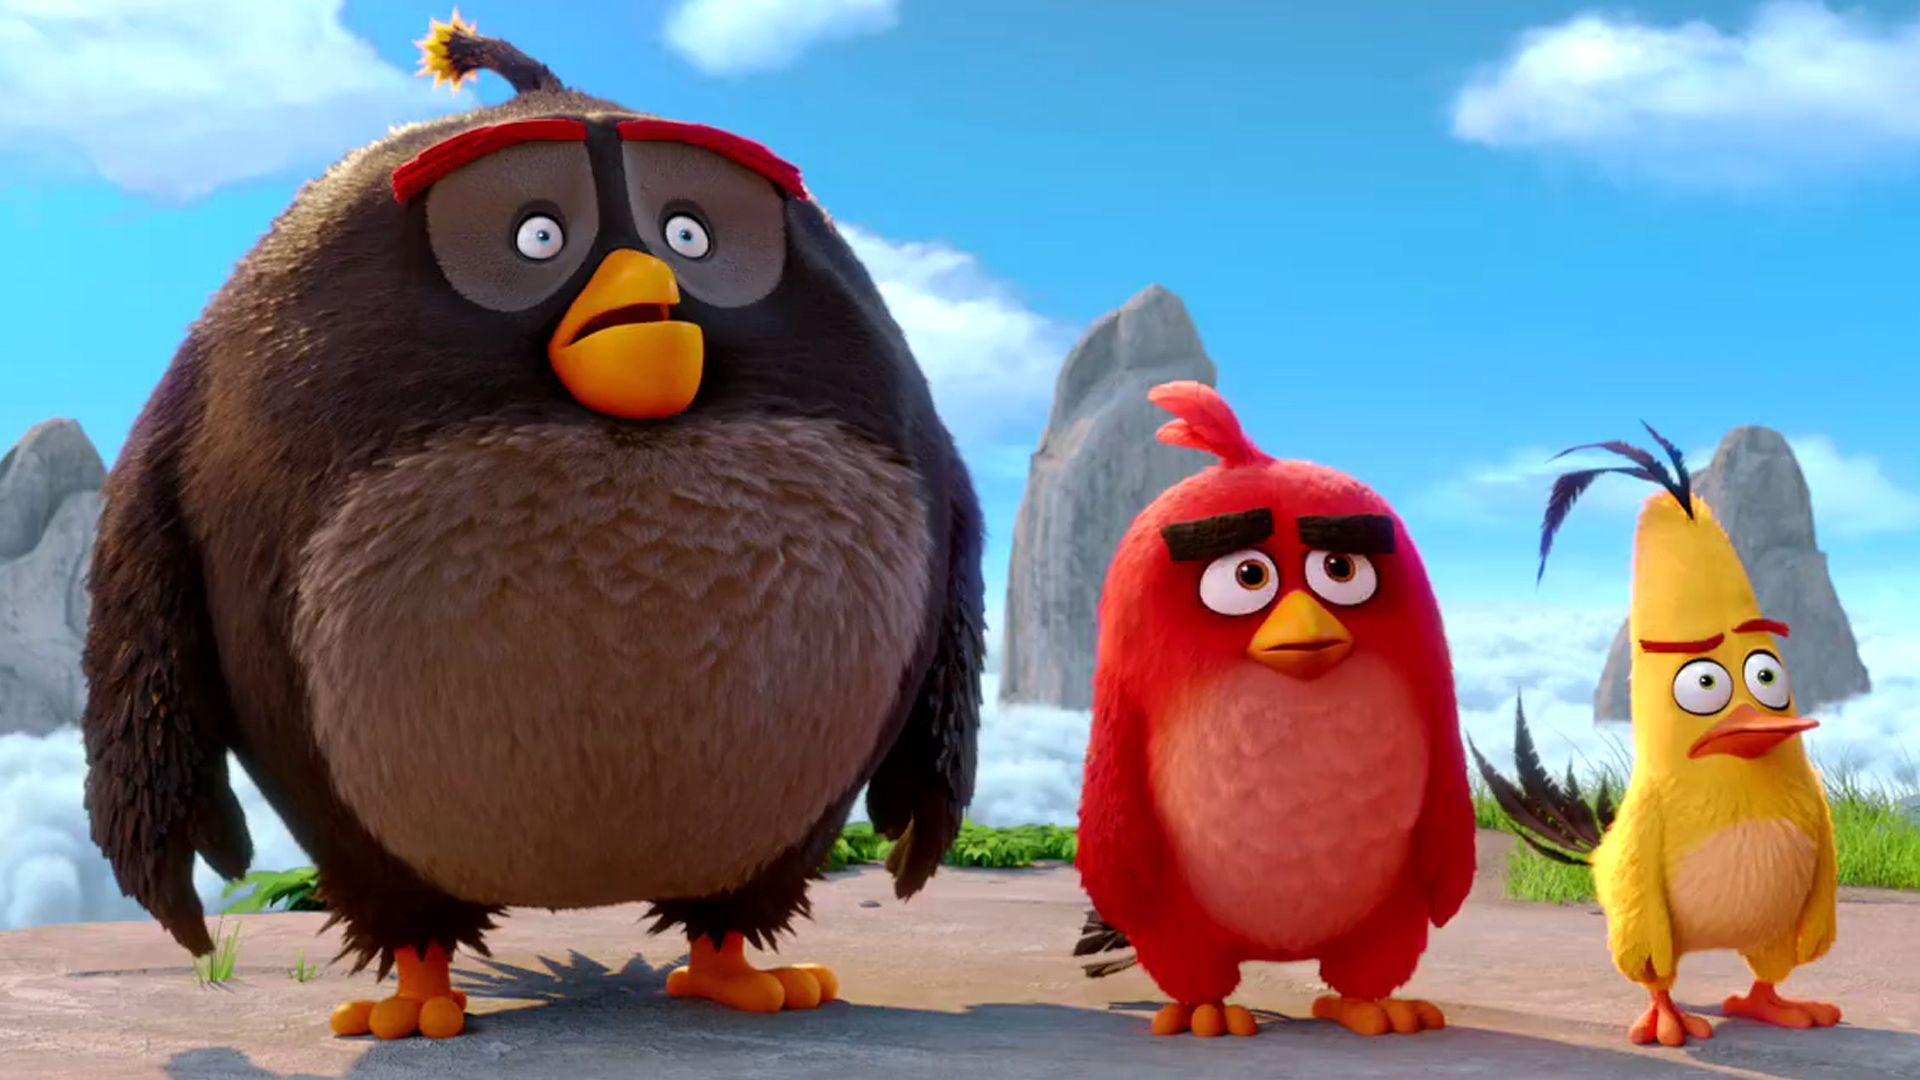 The Angry Birds Movie Wallpaper 15 HD Wallpaper Free